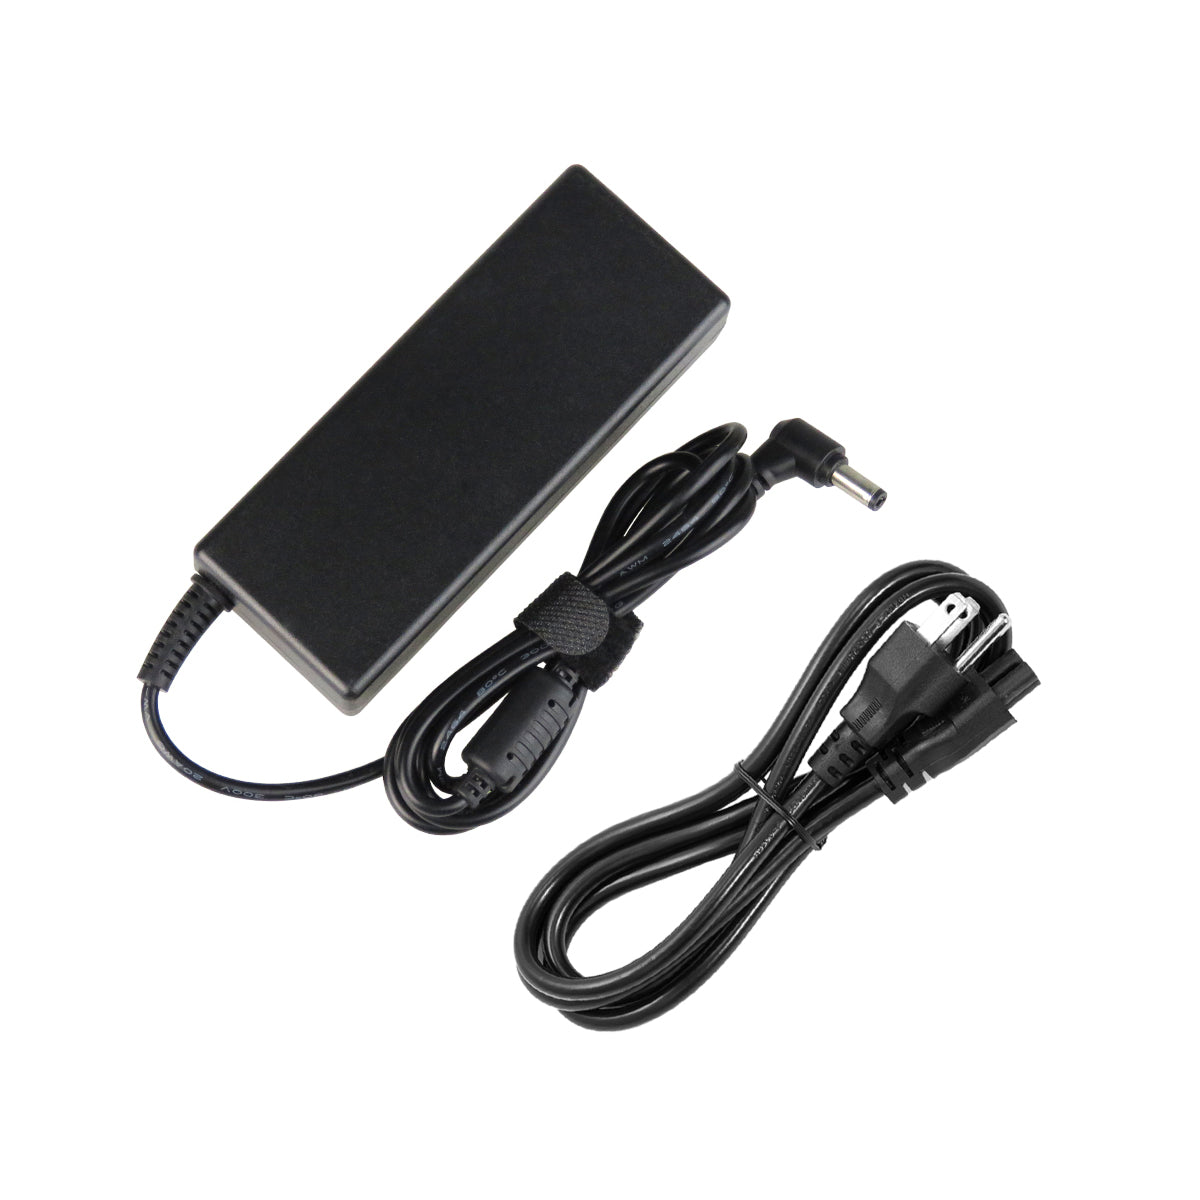 AC Adapter Charger for ASUS X54C-RB92 Notebook.